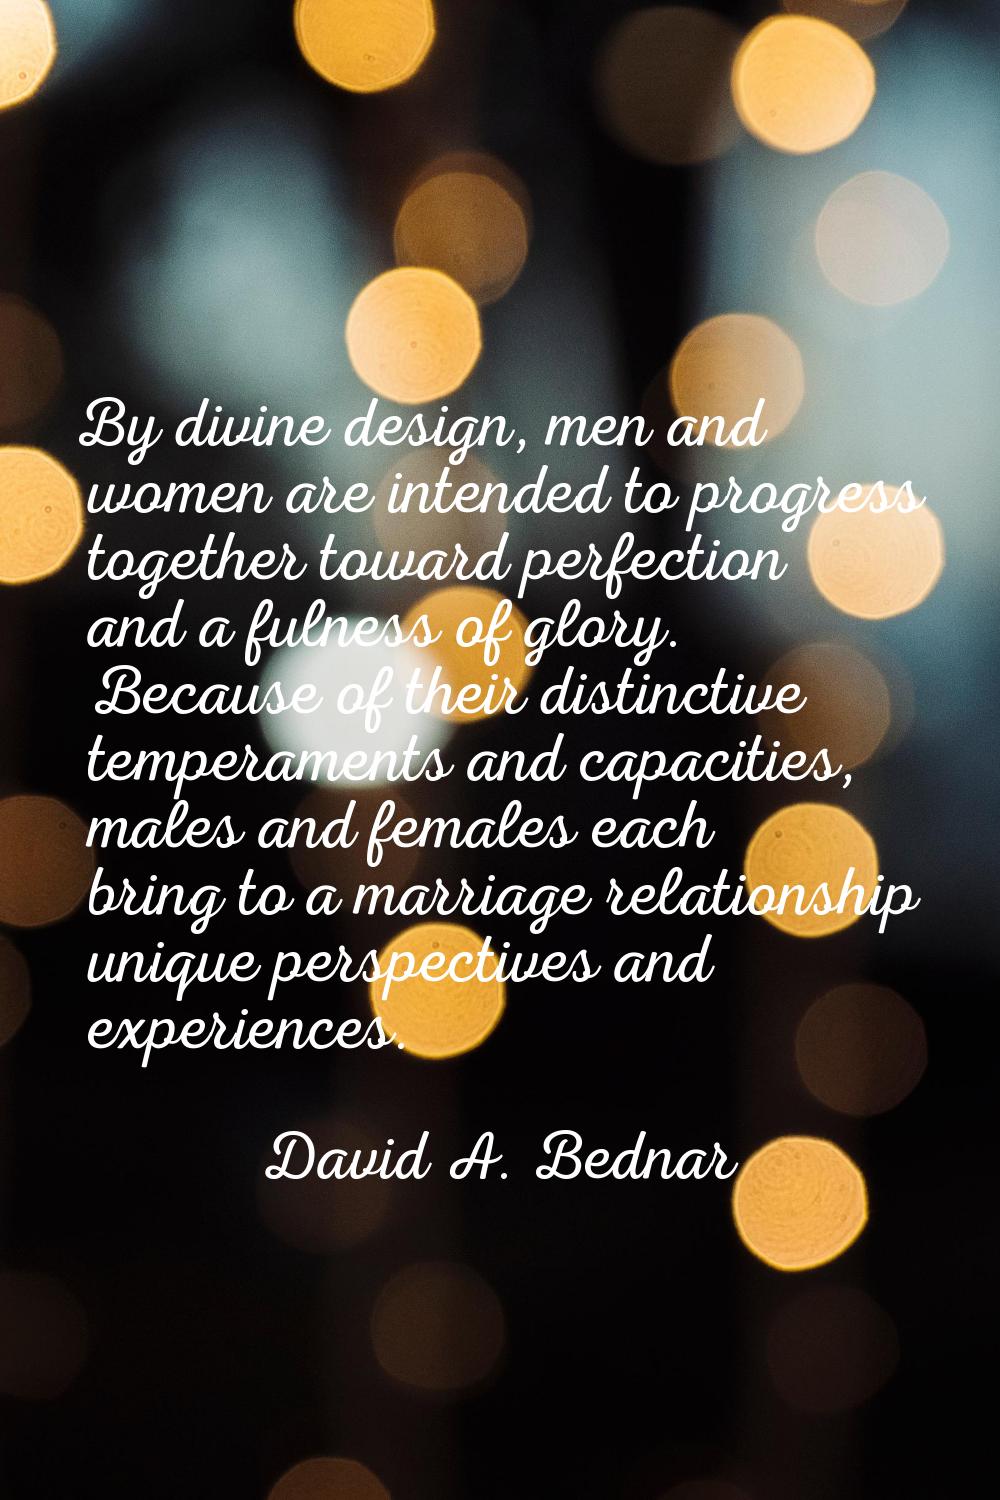 By divine design, men and women are intended to progress together toward perfection and a fulness o